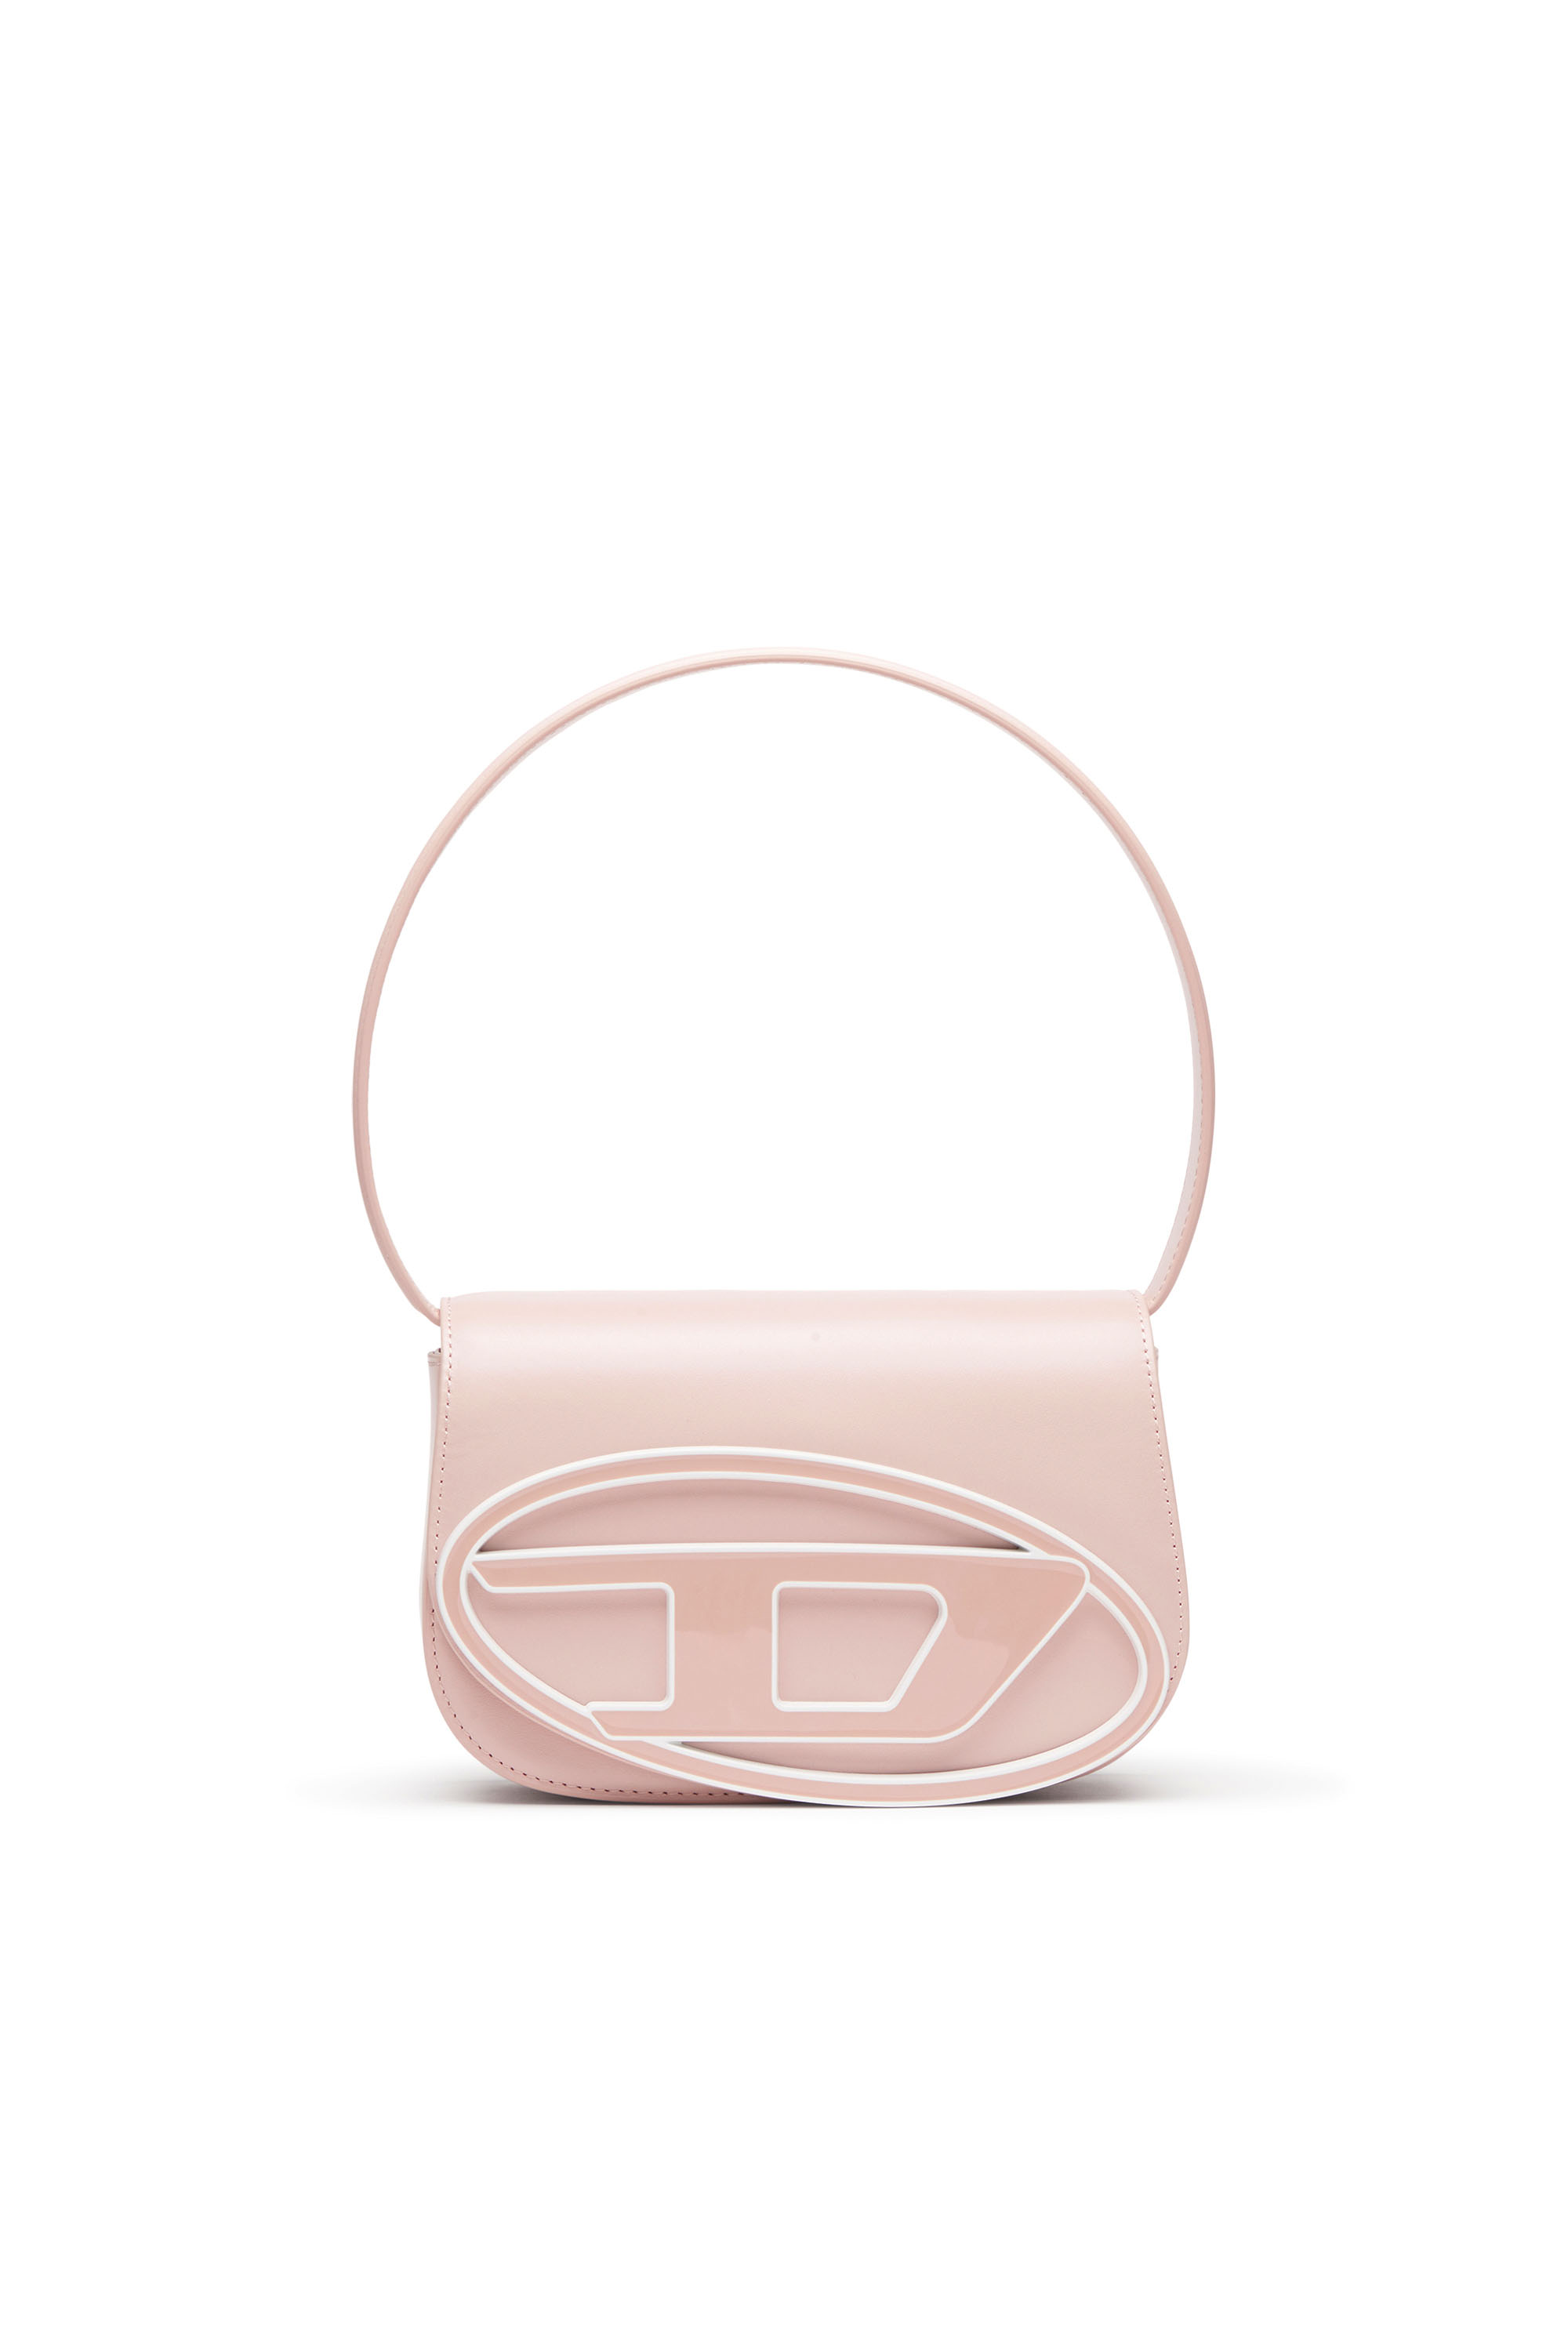 Diesel 1DR Bags: Leather shoulder bags, mirrored small logo bags